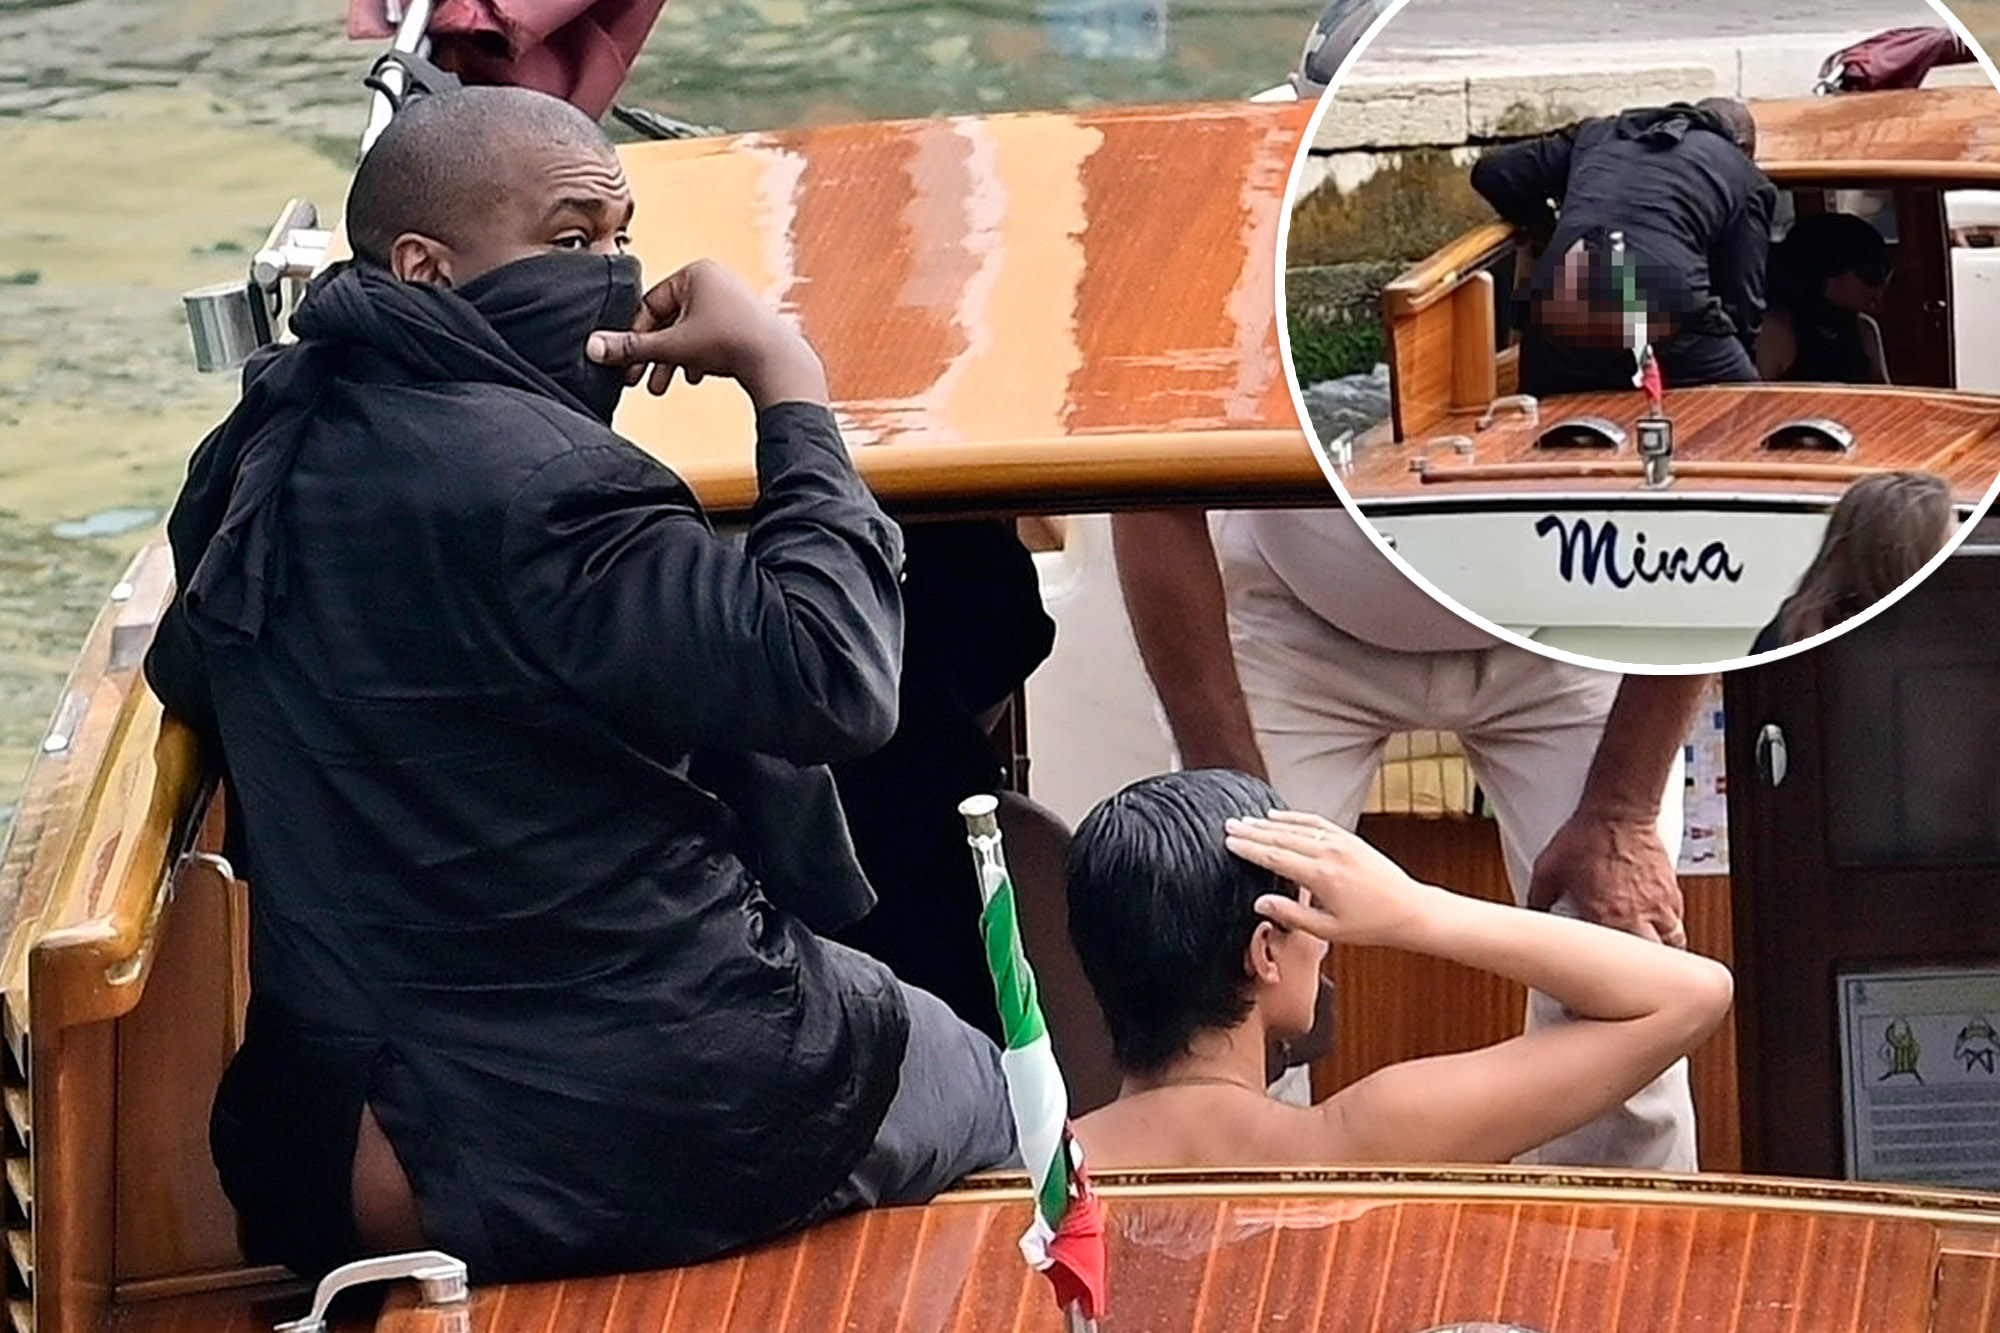 Kanye West and wife Bianca Censori  banned for life by boat rental company for indecent exposure in Italy